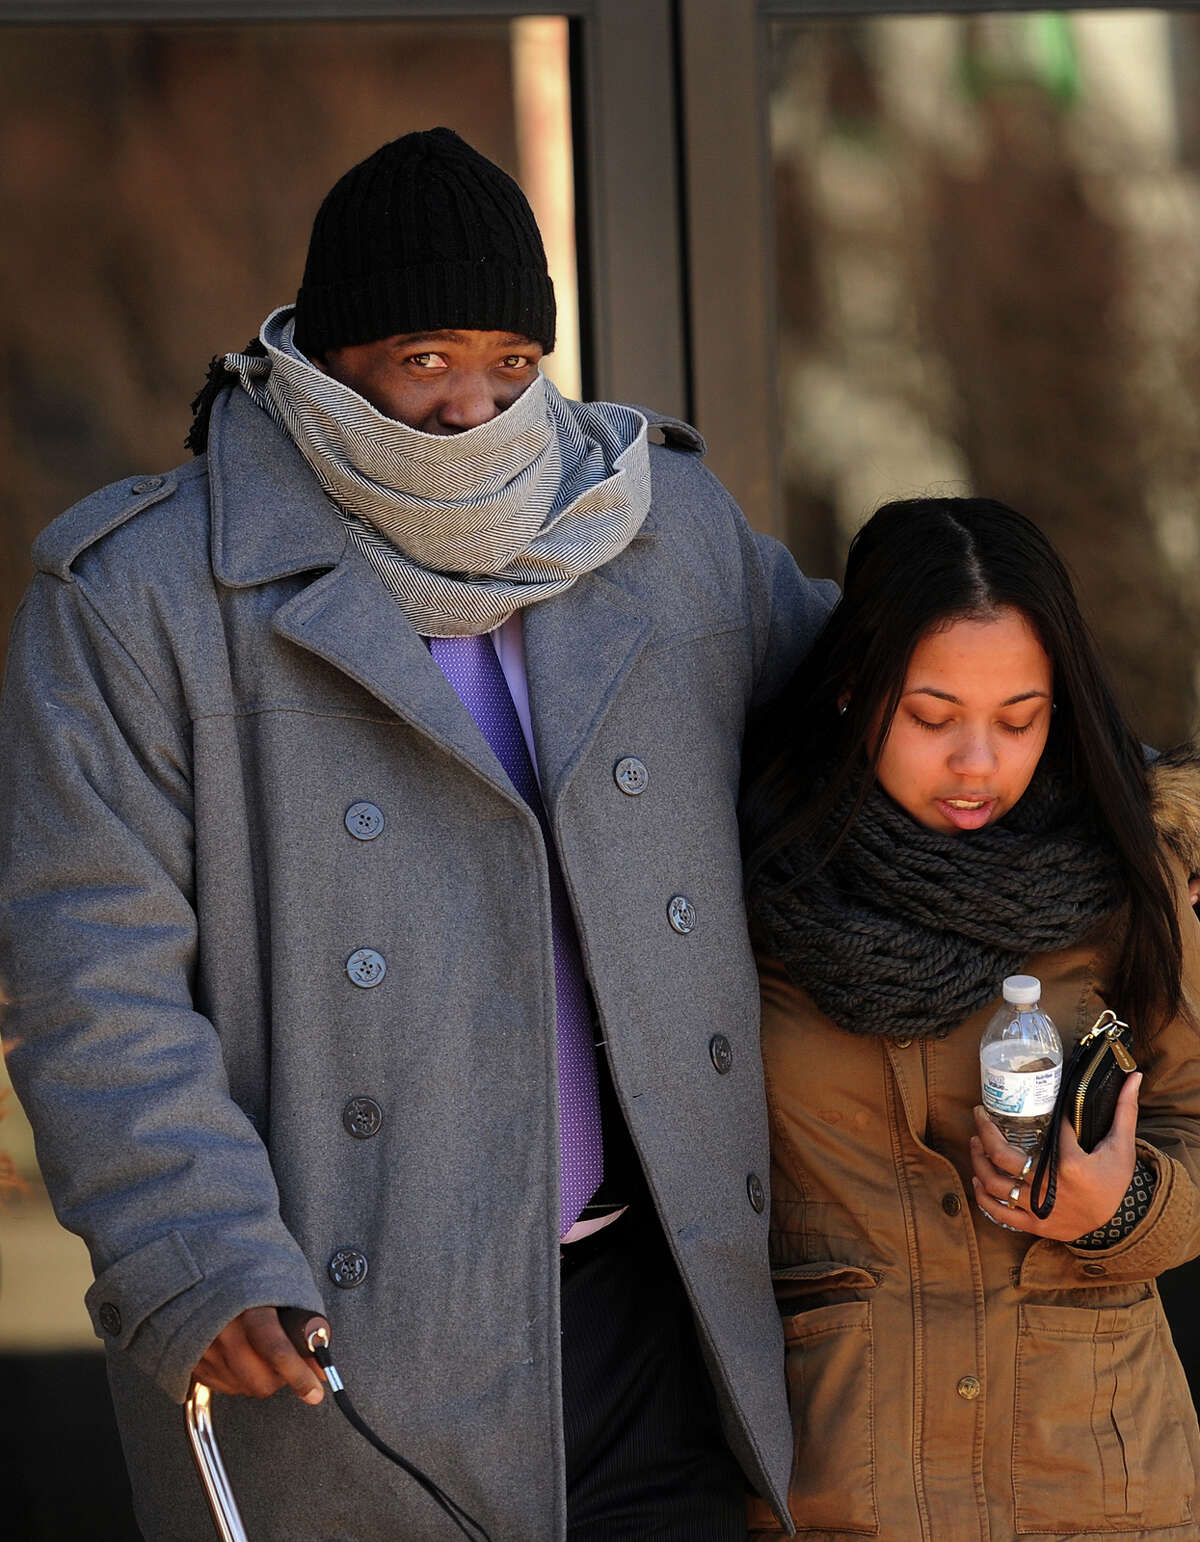 Bridgeport Police Officer Clive Higgins walks with his arm around his daughter as he exits Federal Court in Bridgeport, Conn. on Tuesday, January 13, 2015 where he is standing trial for the 2011 beating of Orlando Lopez Soto. Higgins was videotaped with two others officers kicking Lopez Soto on the ground following a car chase. The other officers, Elson Morales and Joseph Lawlor, pleaded guilty in June.